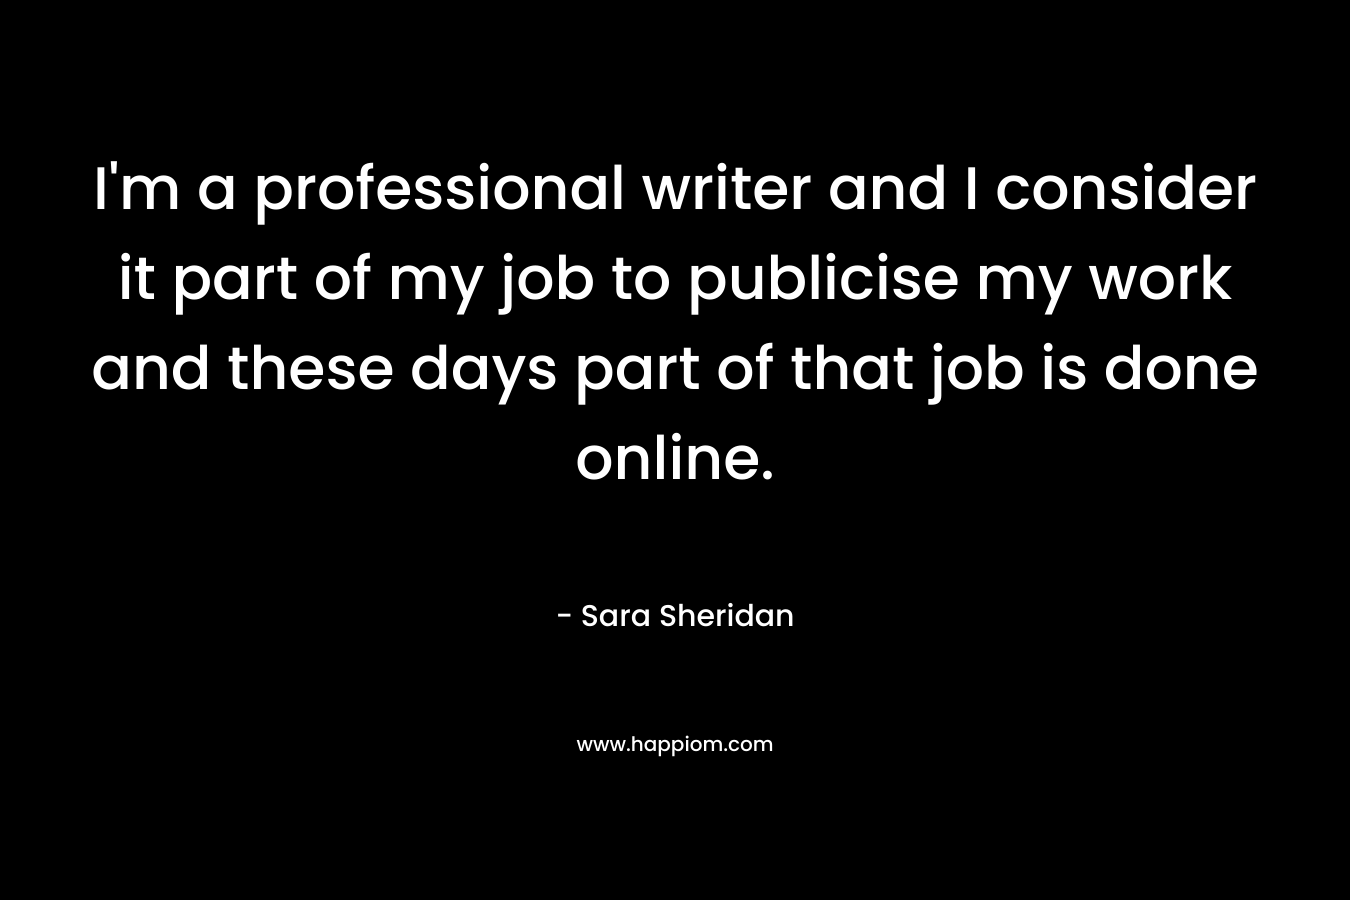 I’m a professional writer and I consider it part of my job to publicise my work and these days part of that job is done online. – Sara Sheridan